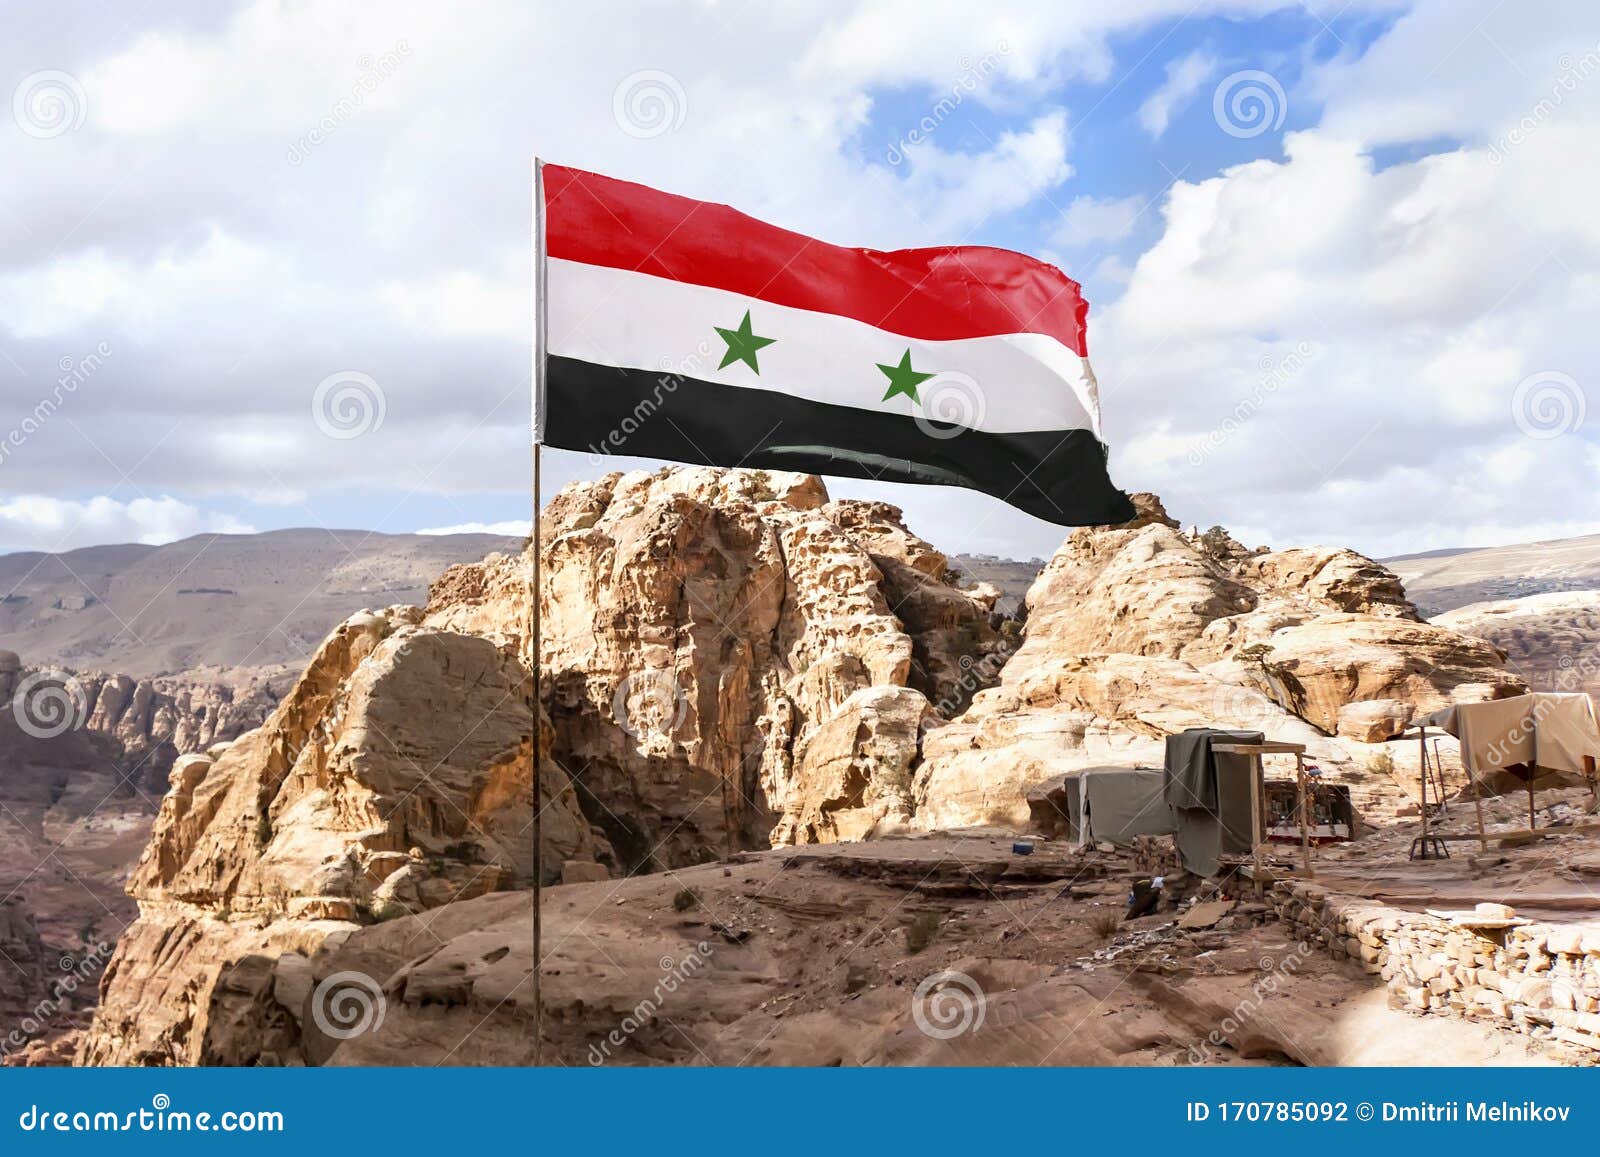 https://thumbs.dreamstime.com/z/flag-syria-flagpole-flutters-wind-against-sky-syrian-set-height-mountains-backdrop-nature-middle-east-170785092.jpg